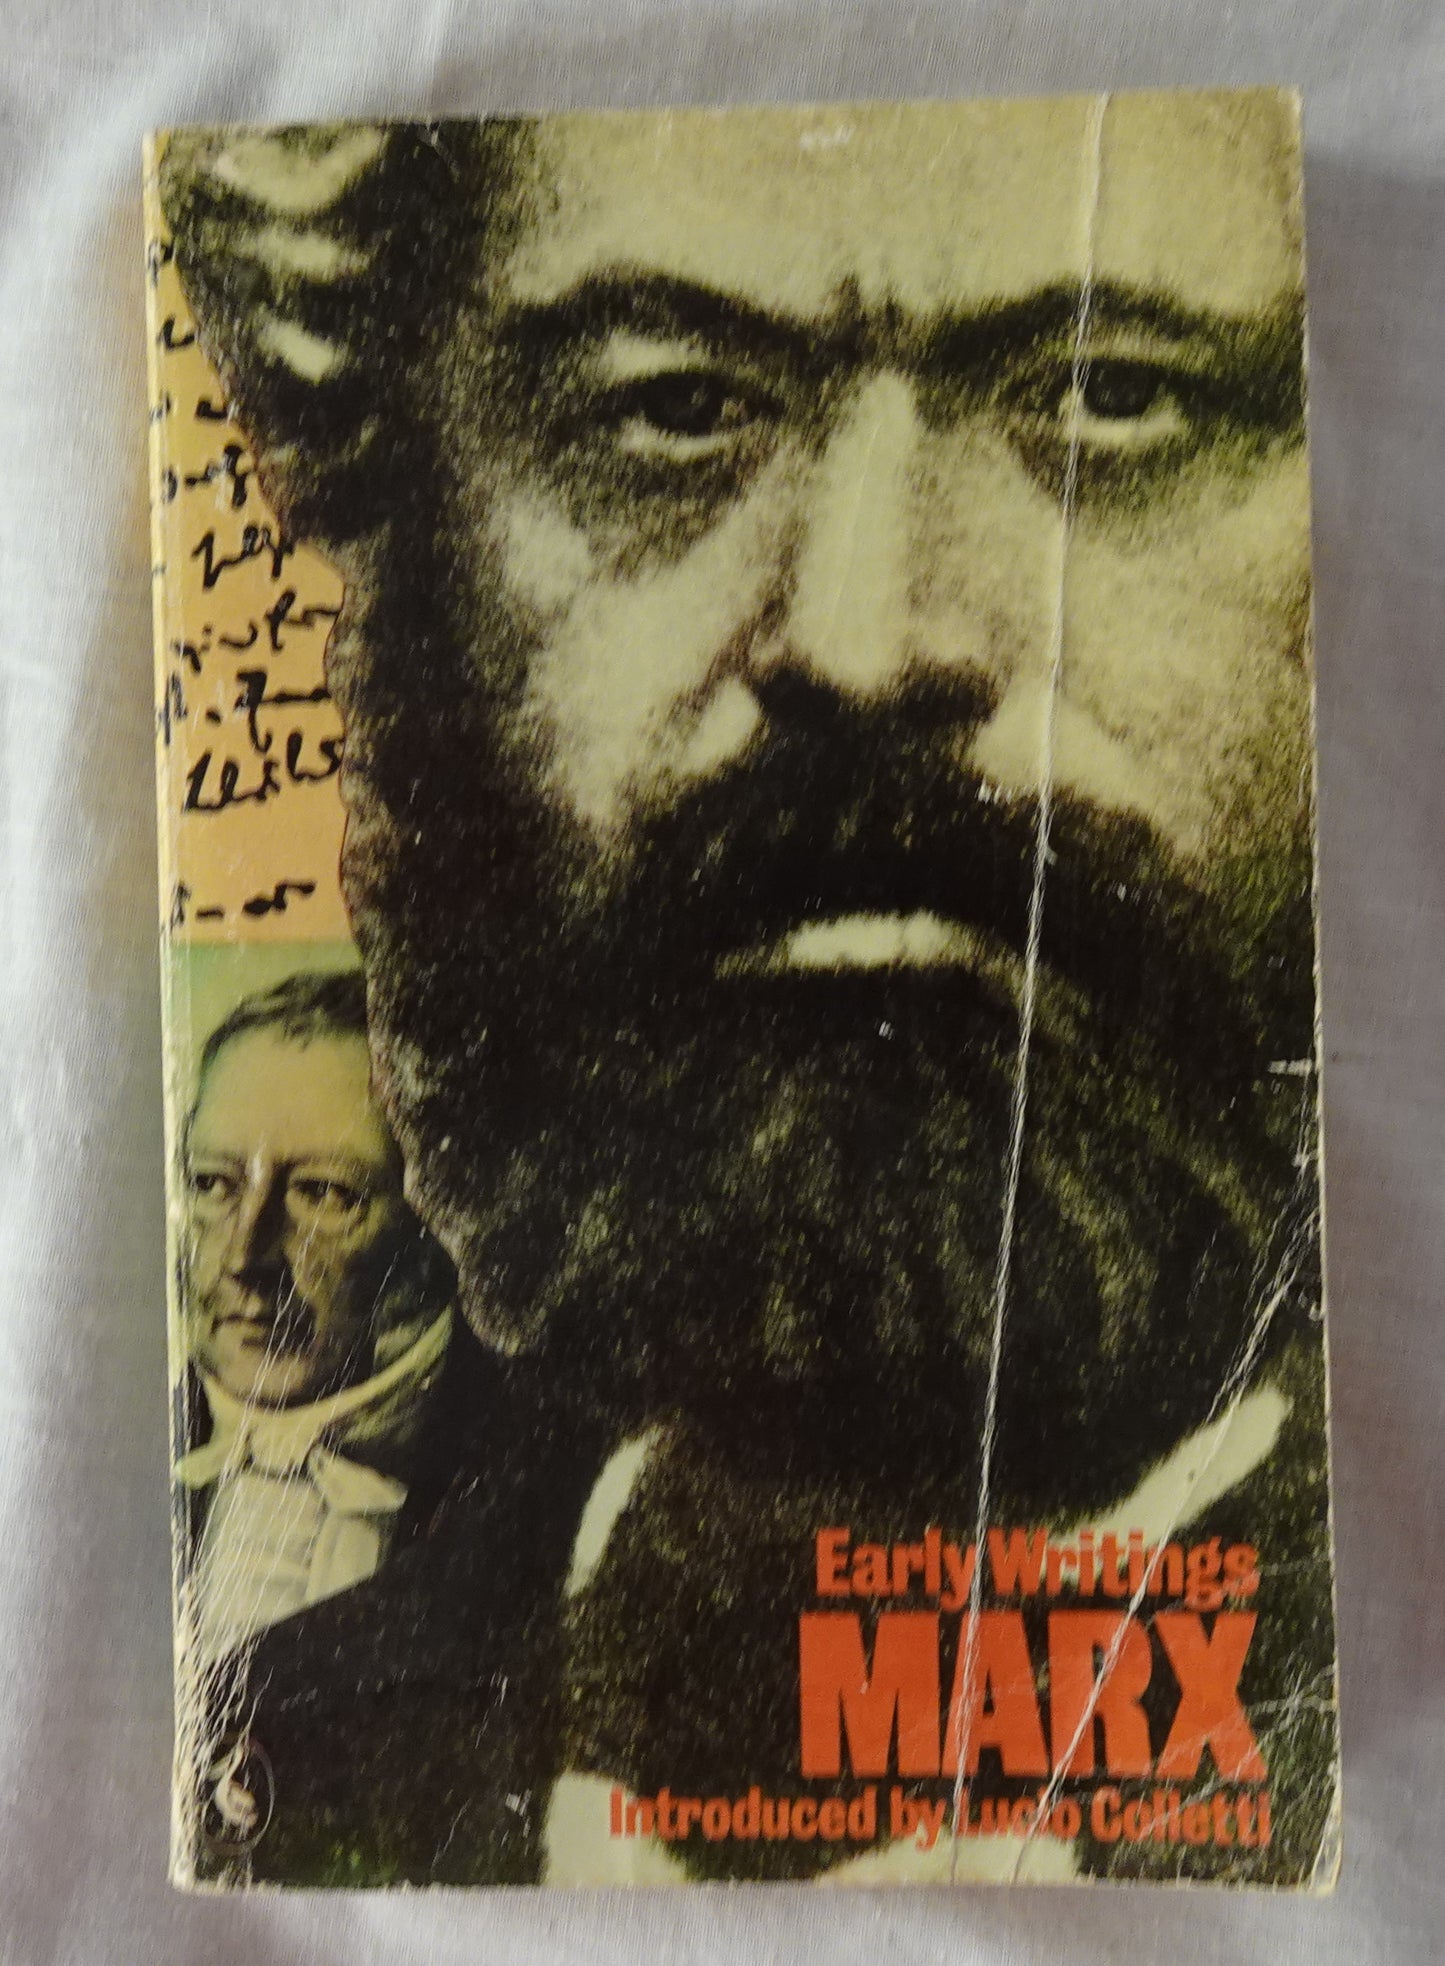 Early Writings  by Karl Marx  Translated by Rodney Livingstone and Gregor Benton